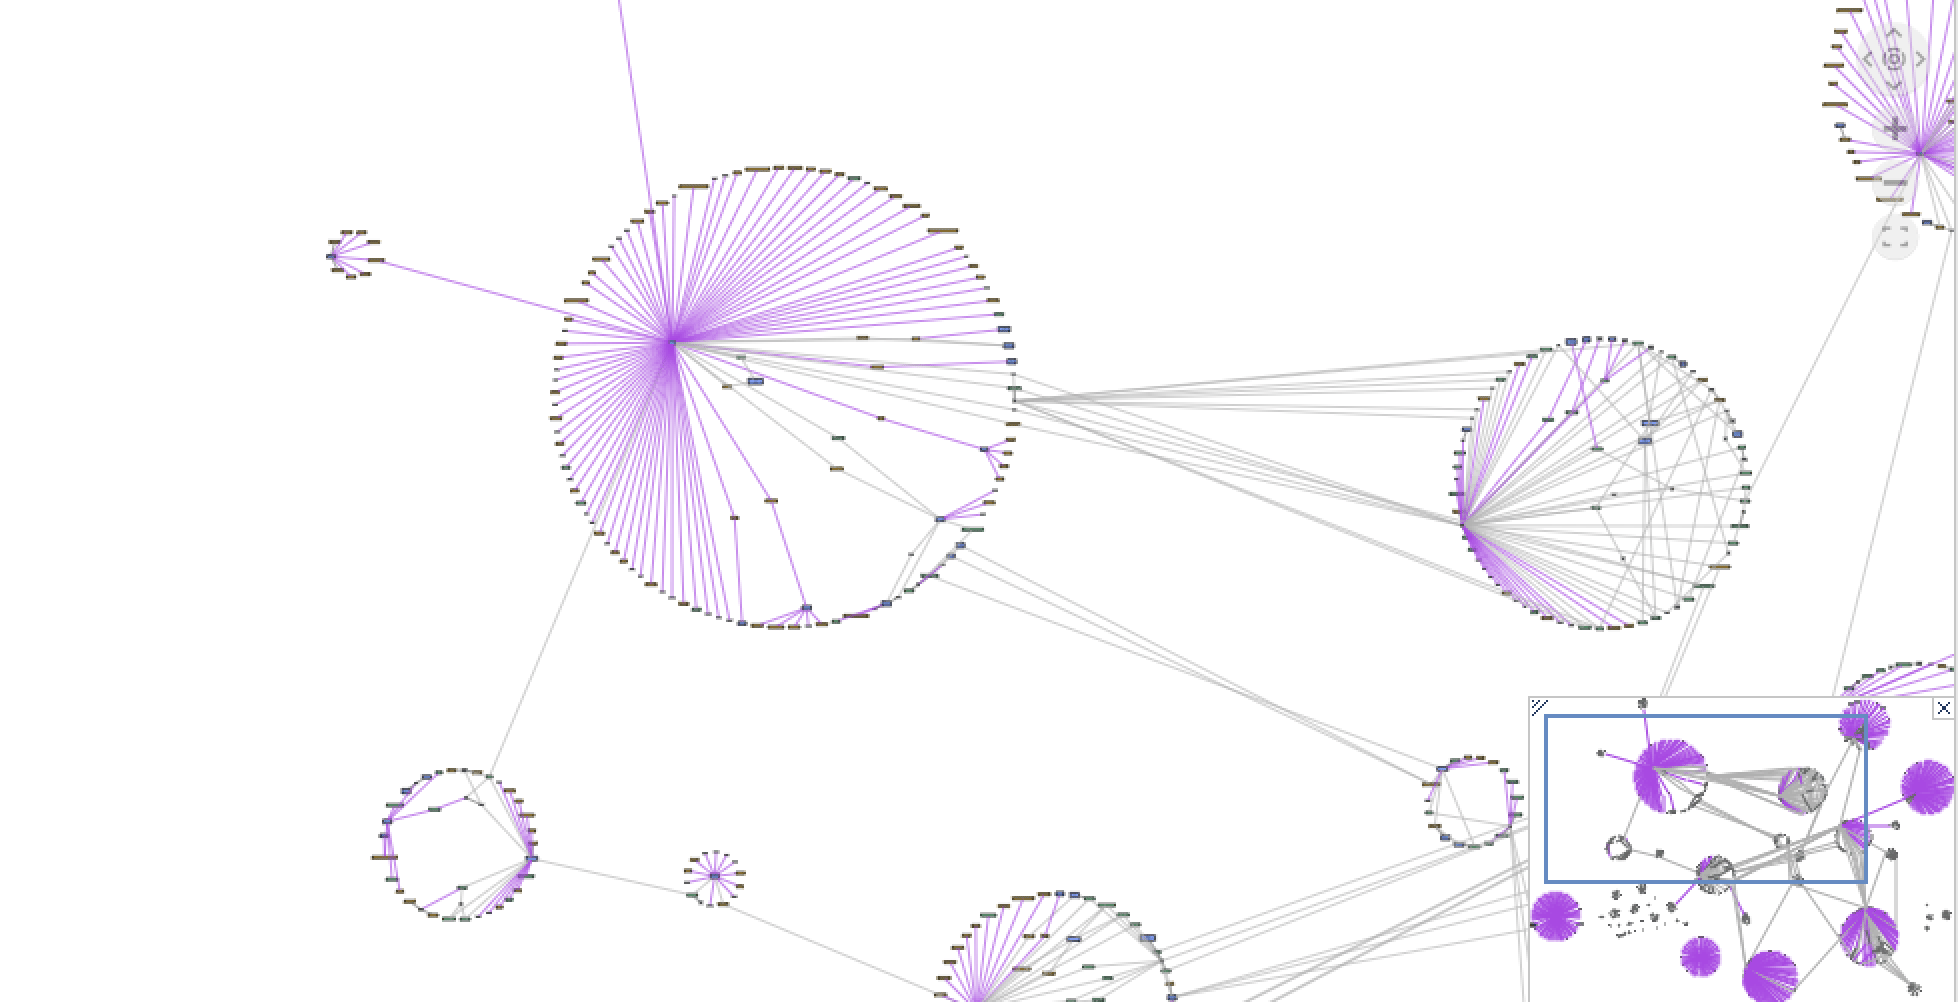 A large circular network graph produced with Tom Sawyer Perspectives.